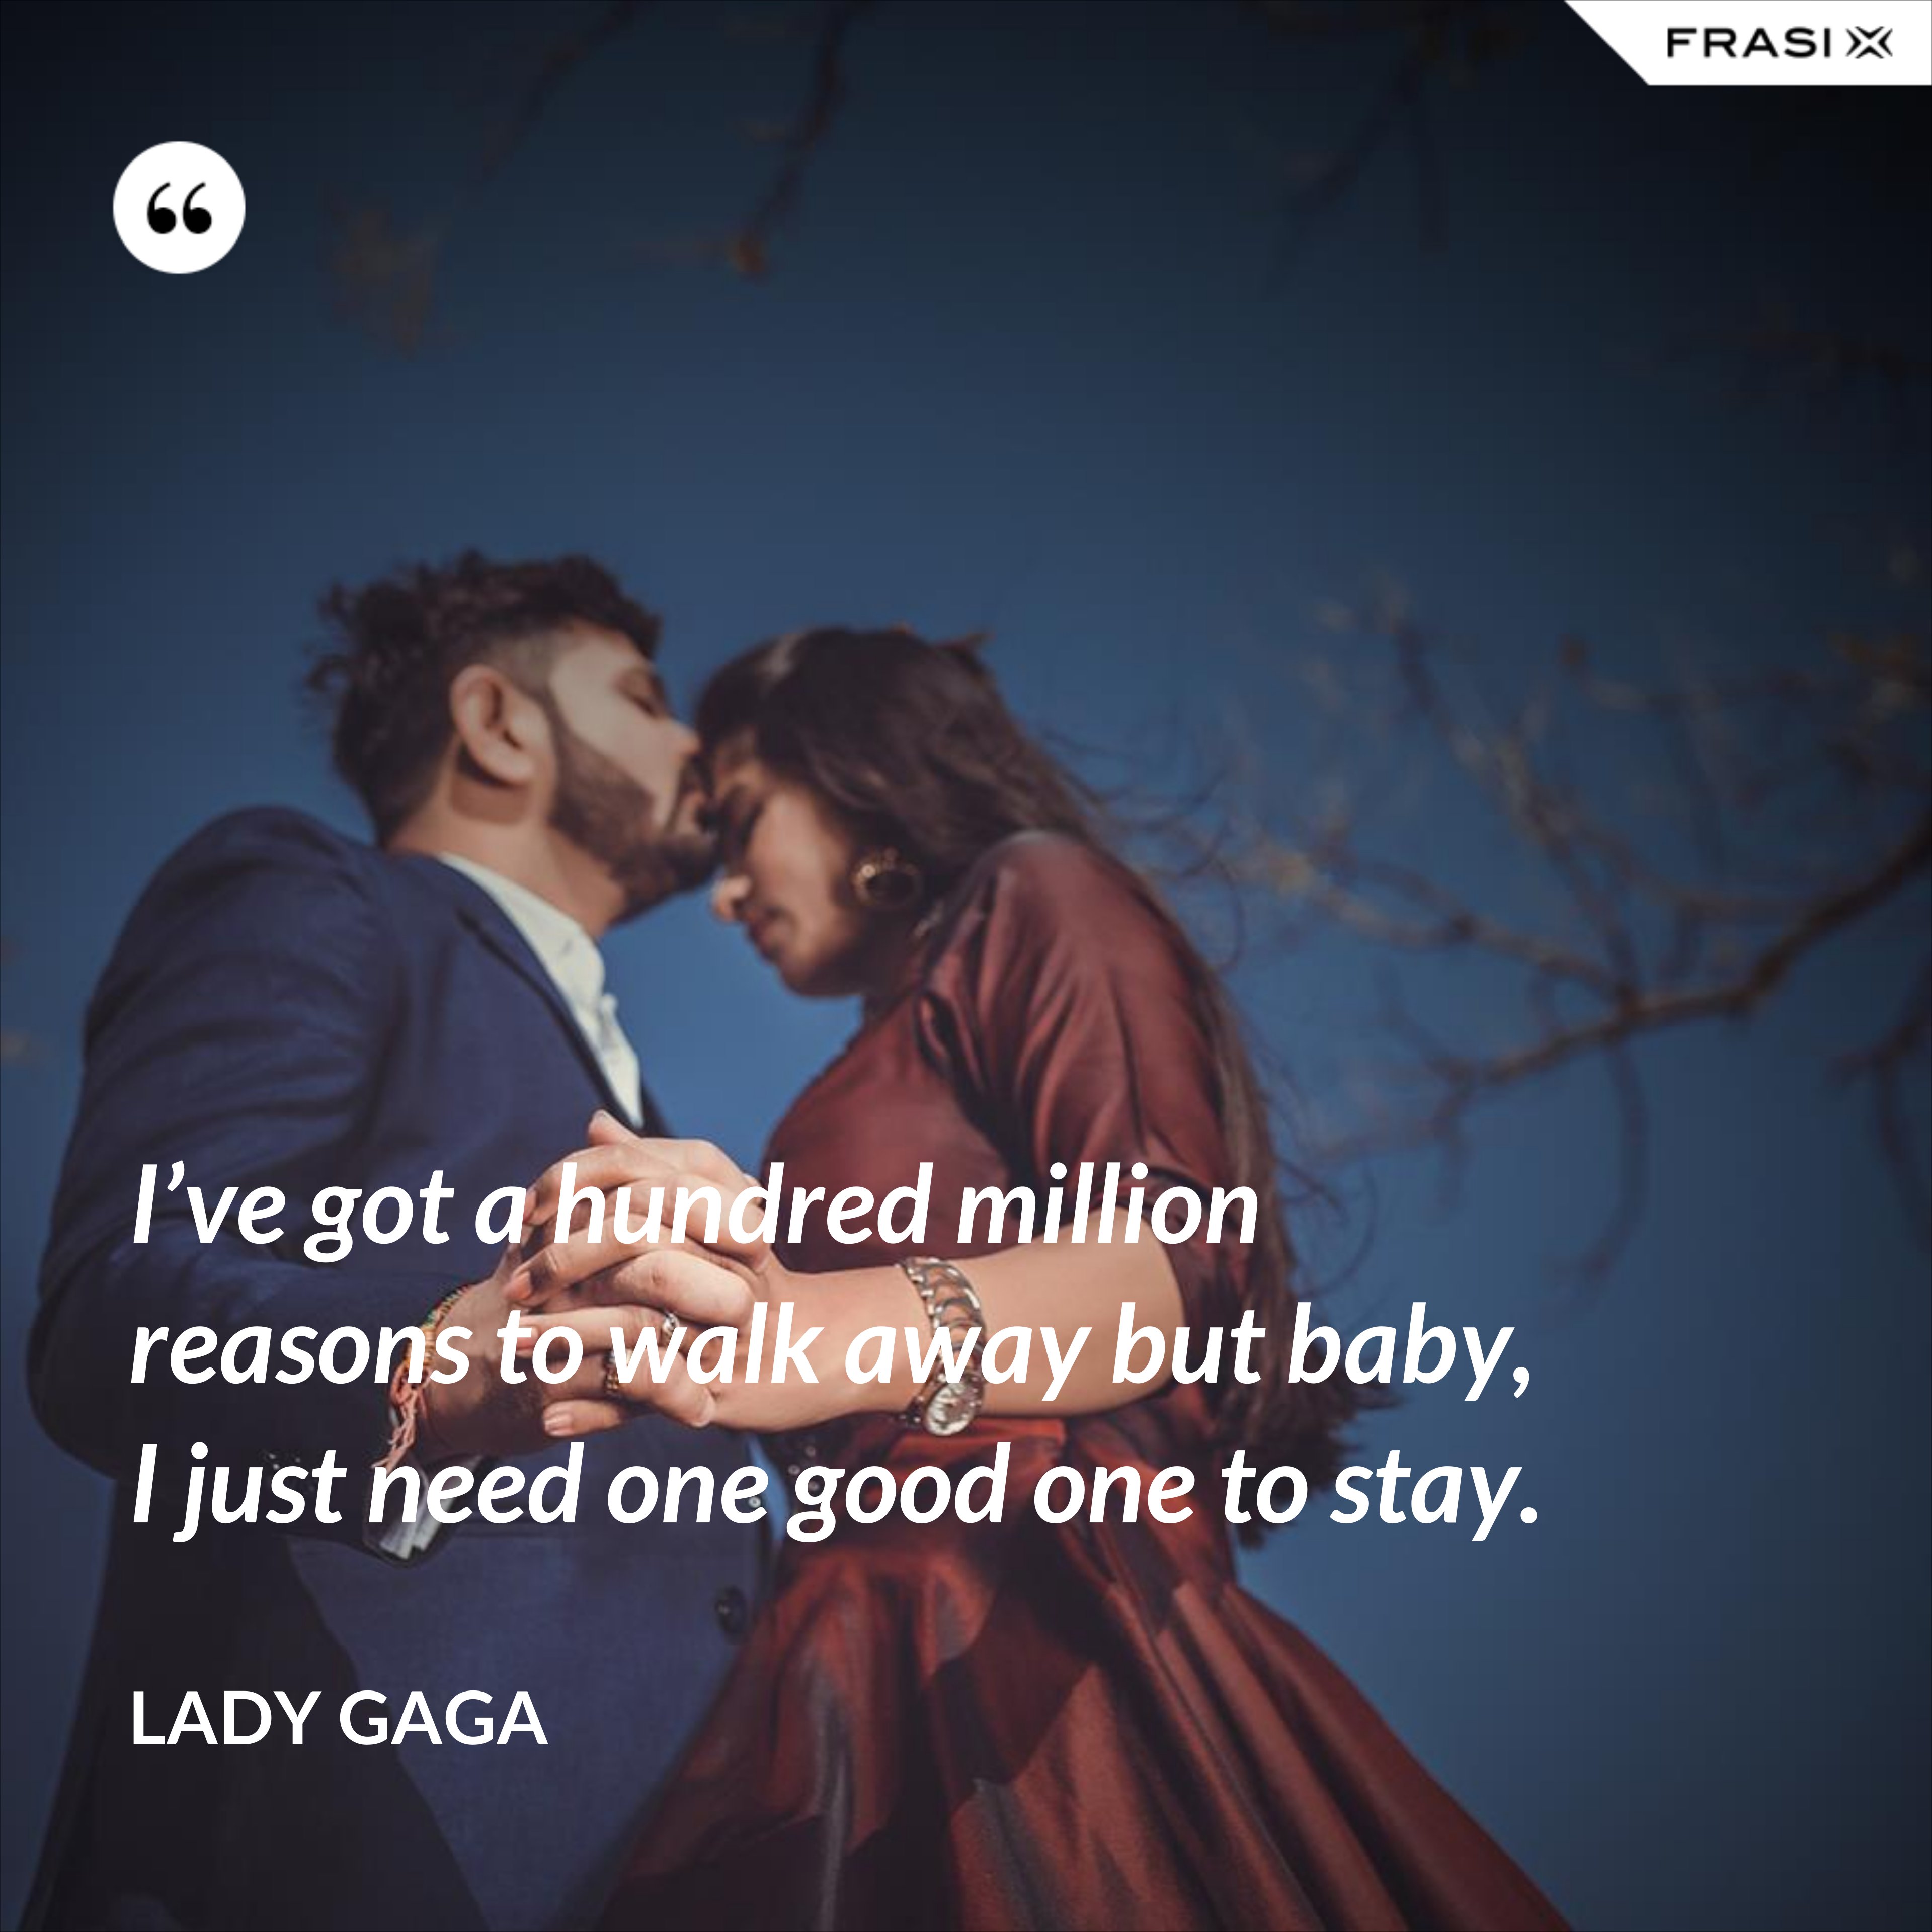 I’ve got a hundred million reasons to walk away but baby, I just need one good one to stay. - Lady Gaga